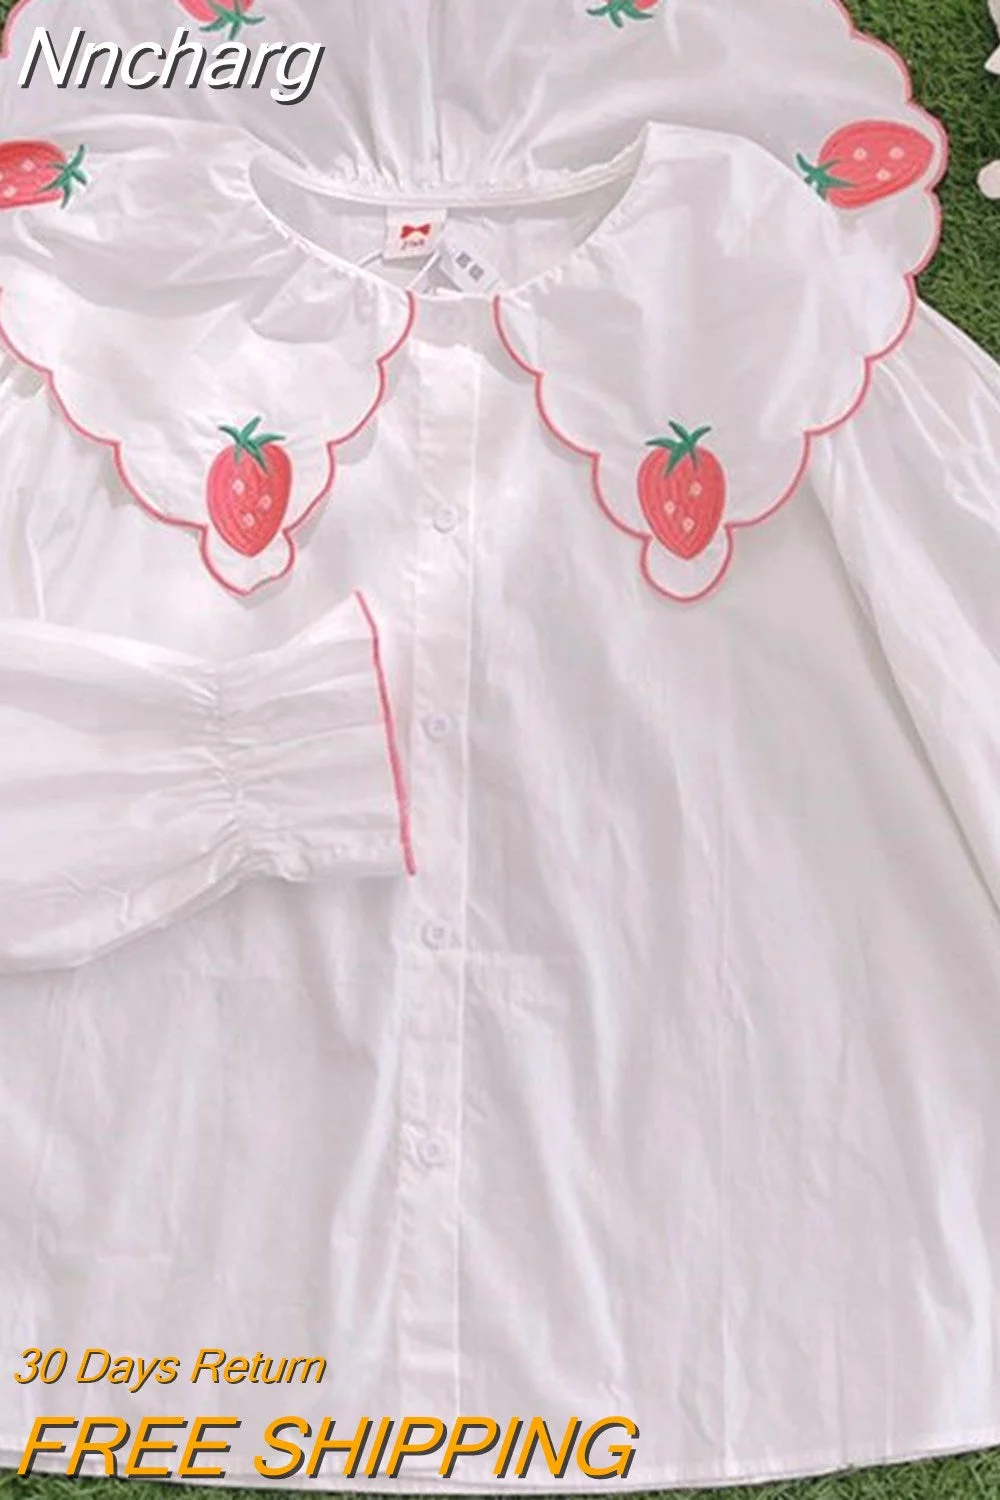 Nncharge Kawaii Sweet Shirts Long Sleeve Chemises Femme Strawberry Embroidery Loose Women Chic Camisas Y2k Preppy Style